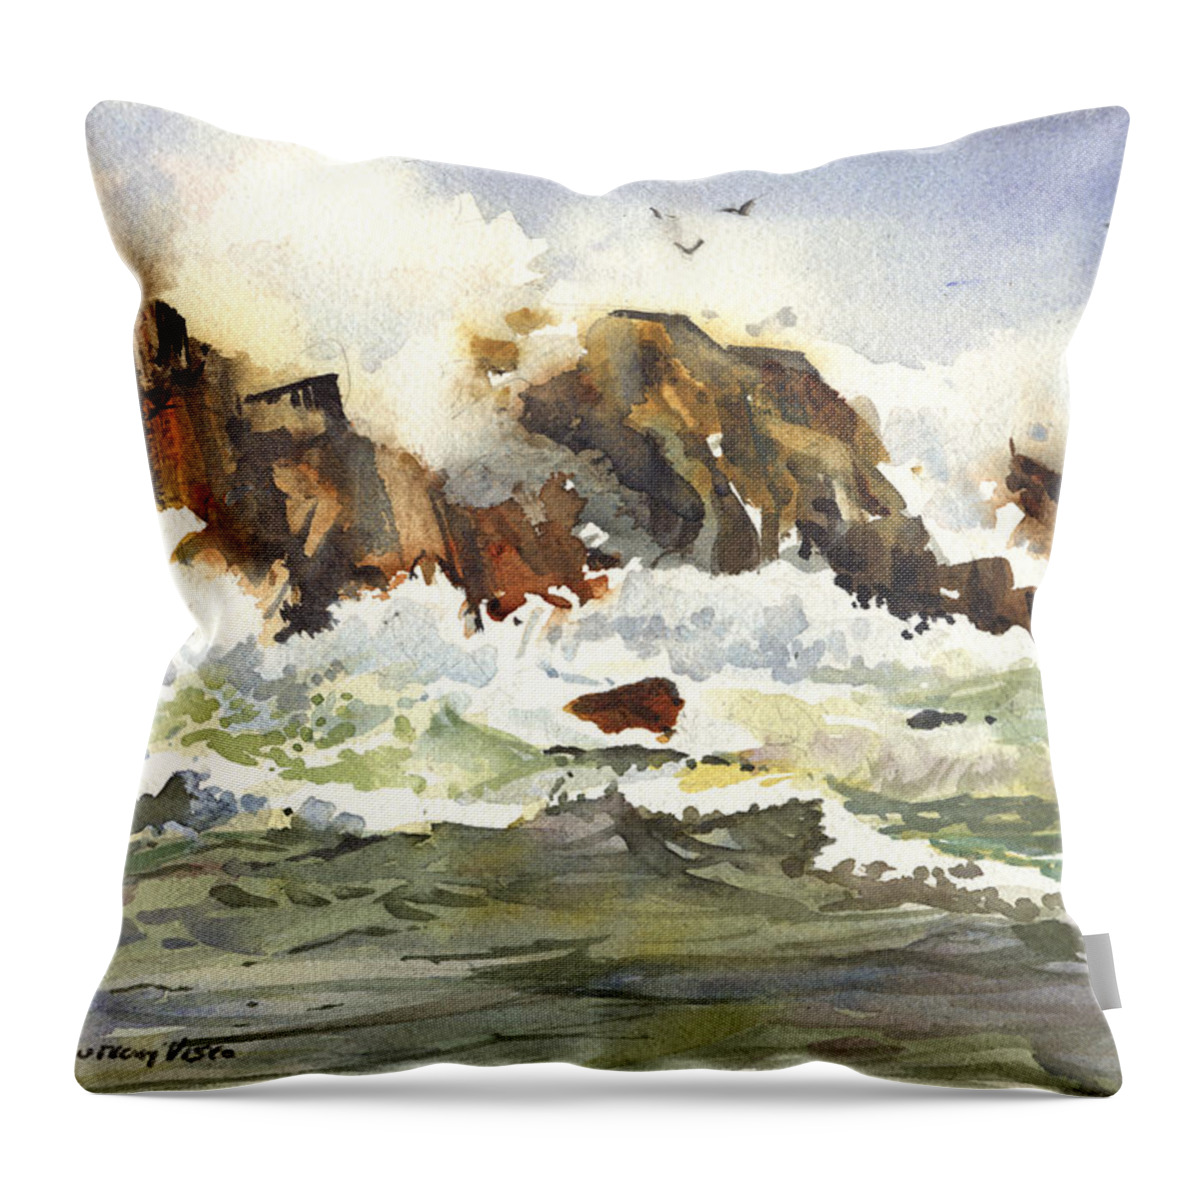 Churning Throw Pillow featuring the painting Churning Surf by P Anthony Visco